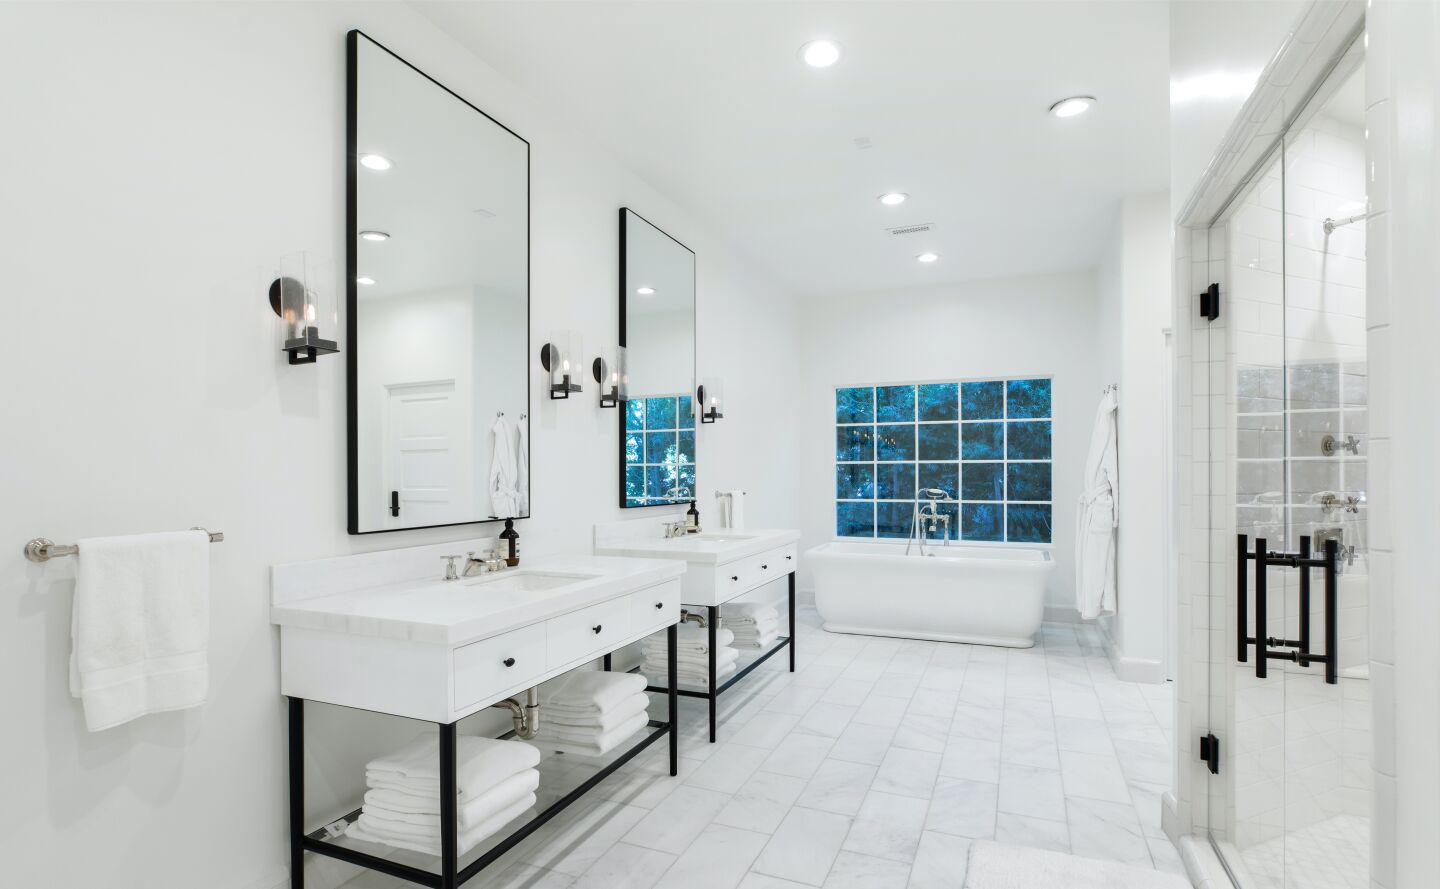 White walled and green and blue tiled bathroom with his and her vanities, a tub and tiled floor.